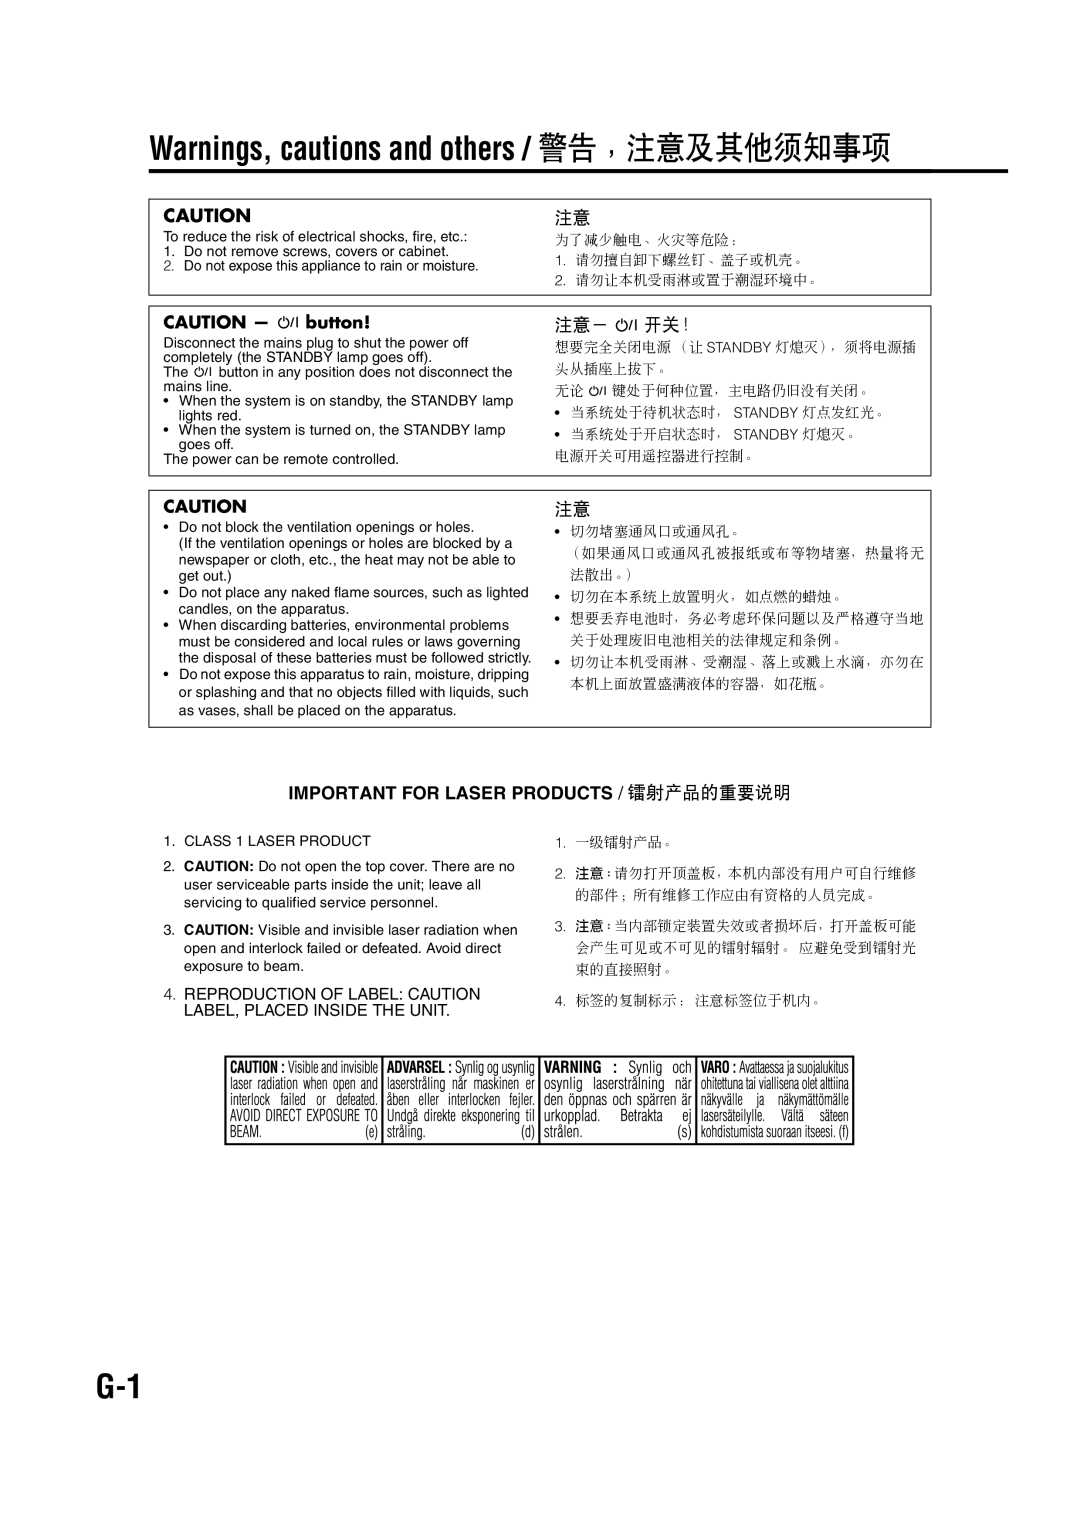 JVC EX-A5 manual CAUTION - F button, Important For Laser Products / 镭射产品的重要说明, Warnings, cautions and others / 警告，注意及其他须知事项 